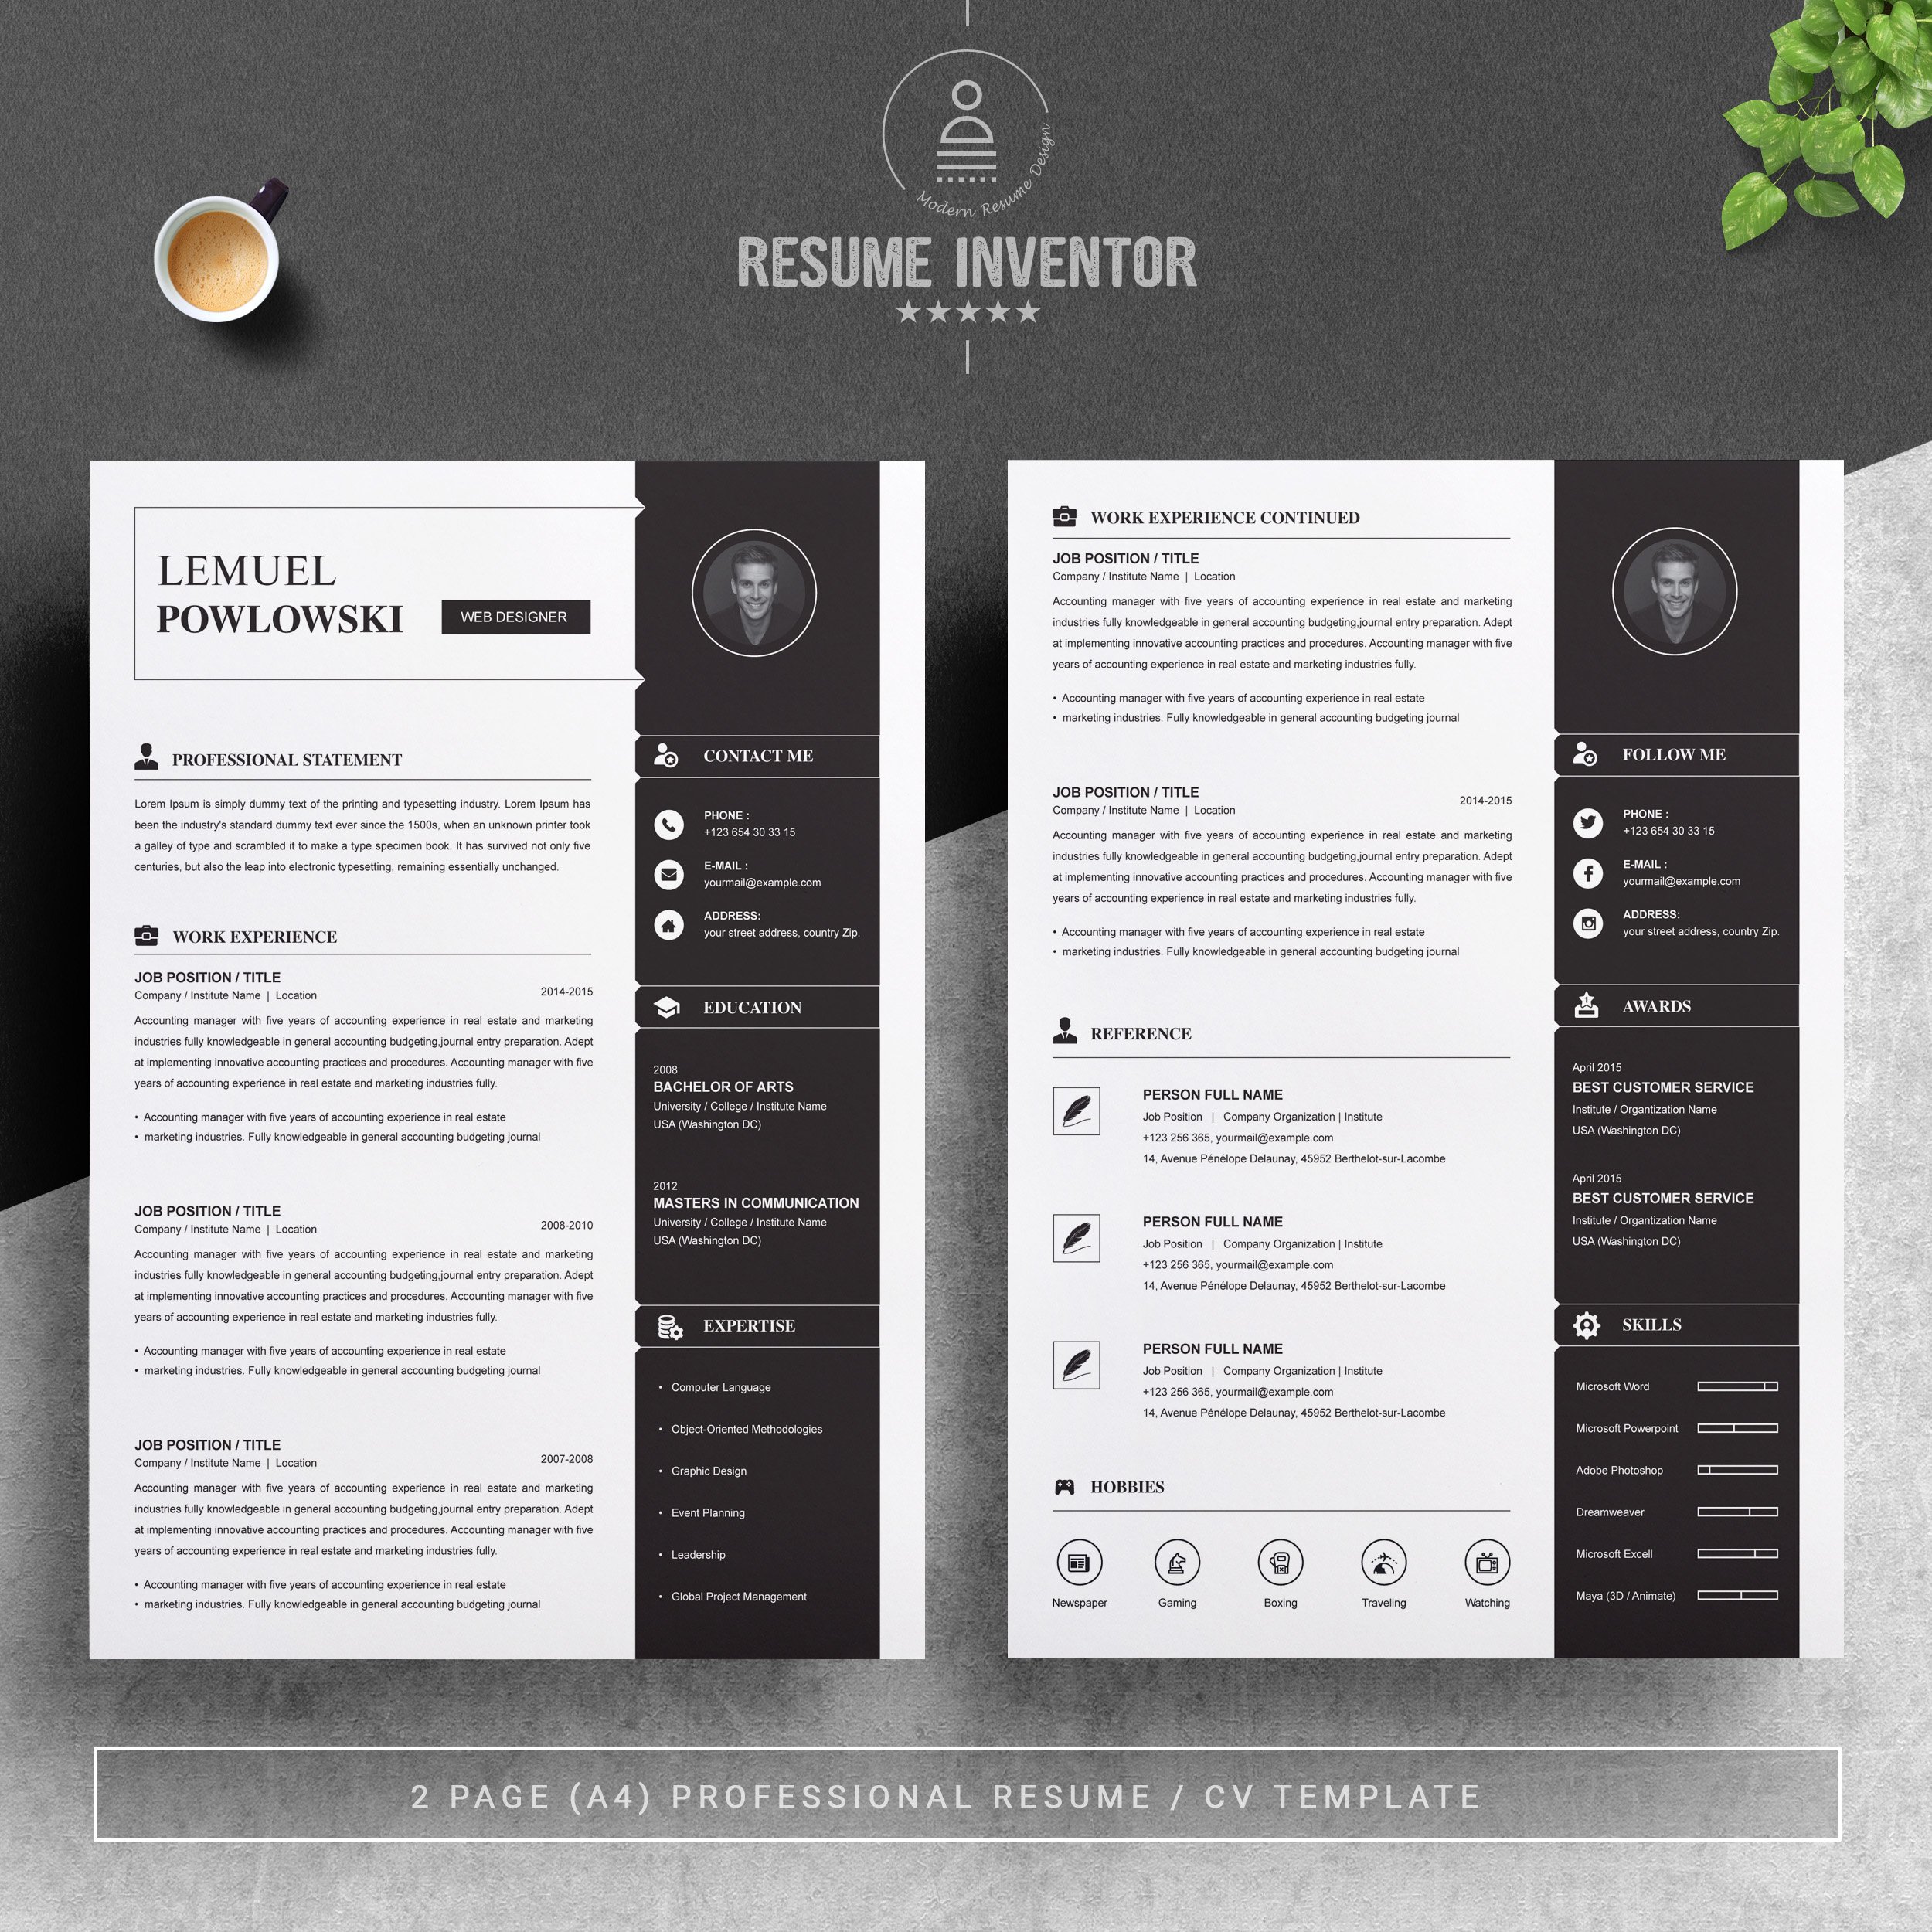 Professional Resume Template / CV preview image.